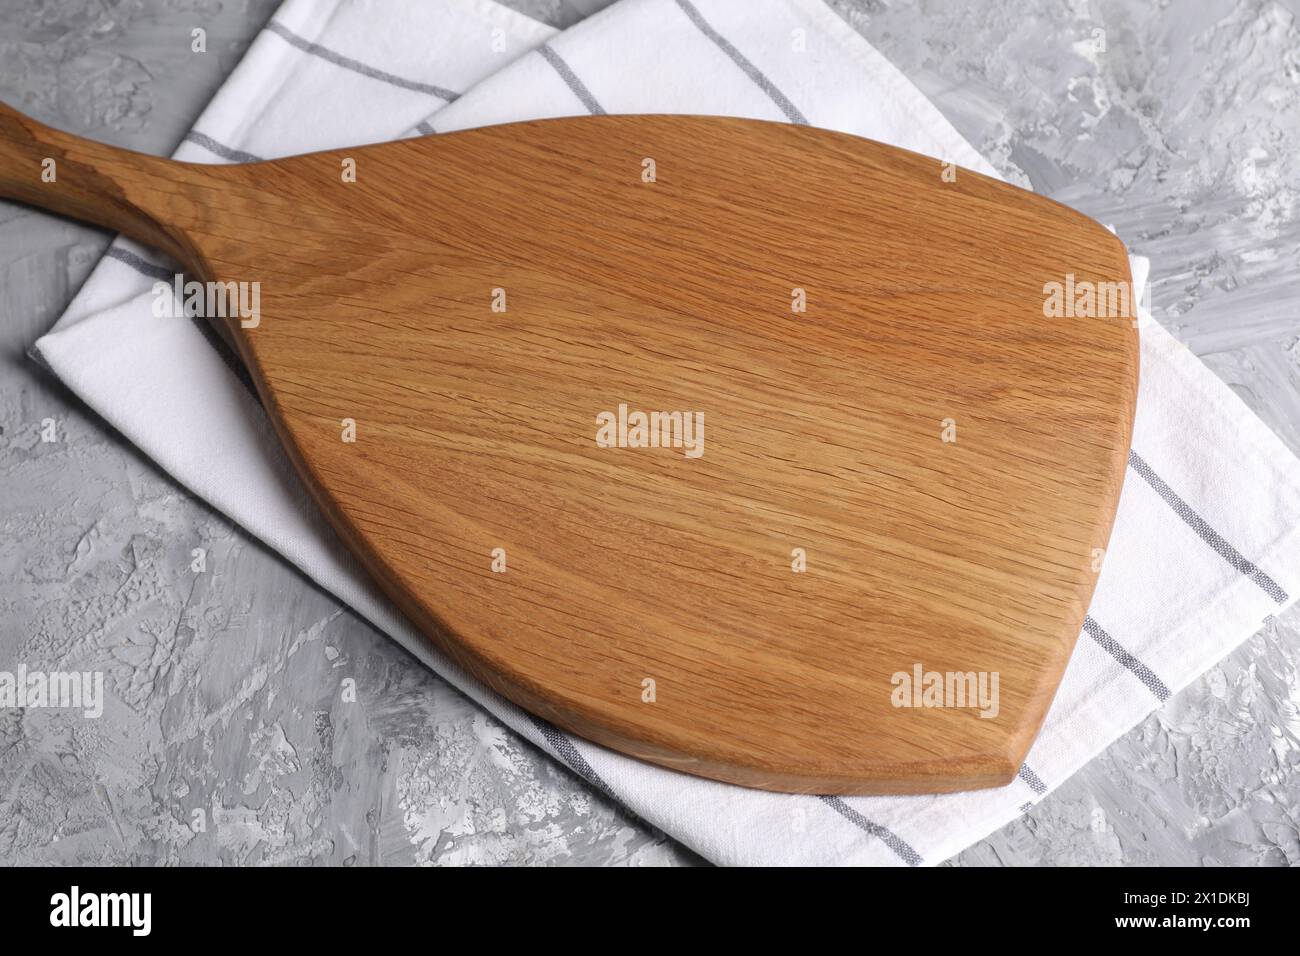 Wooden cutting board and napkin on grey table Stock Photo